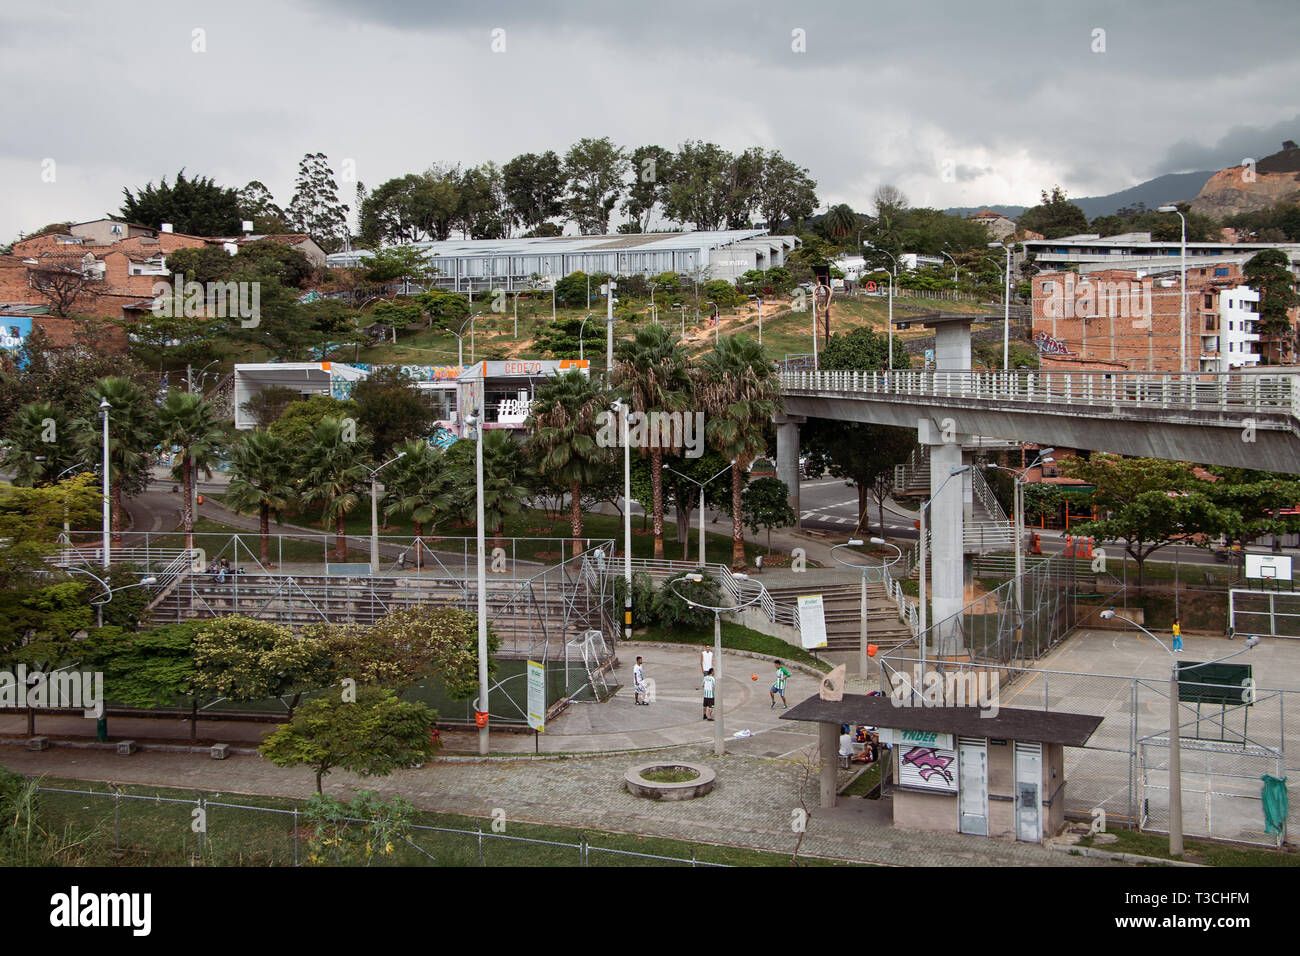 View of local INDER sports pitches and facilities and housing as seen from San Javier Metro station in Medellín (Medellin), Antioquia, Colombia. Stock Photo